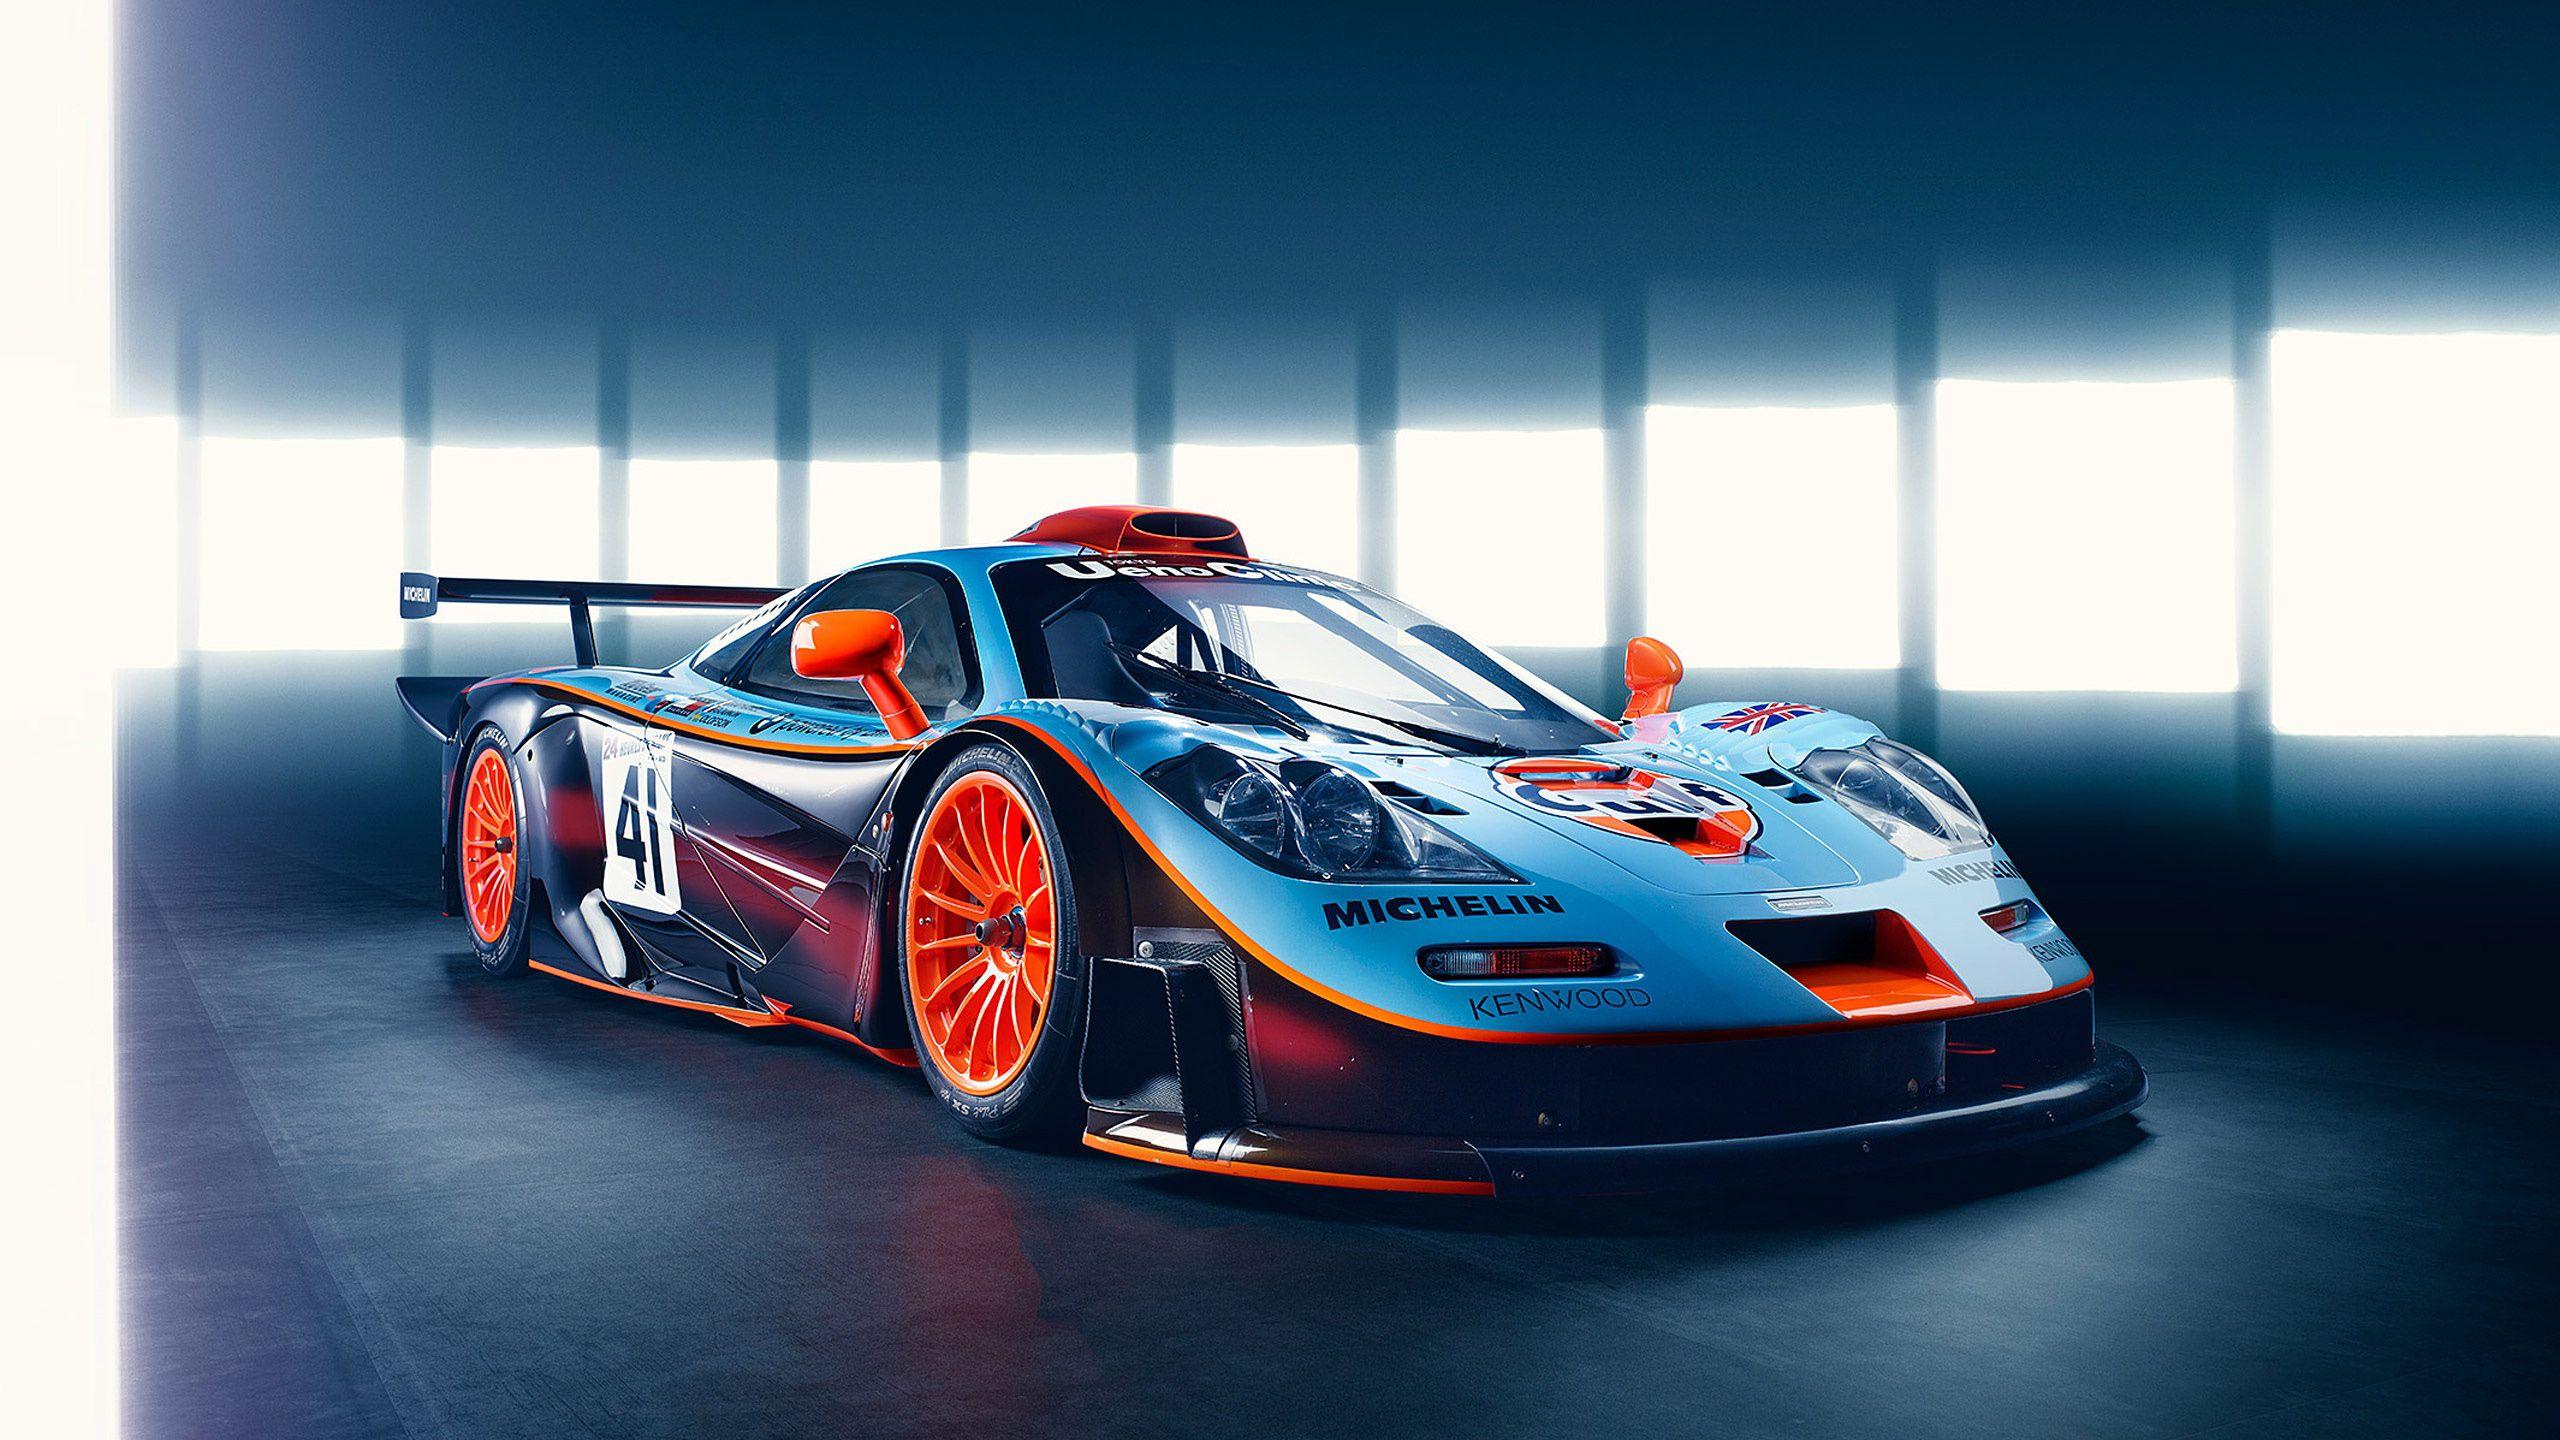 McLaren F1 Wallpaper and Background Image